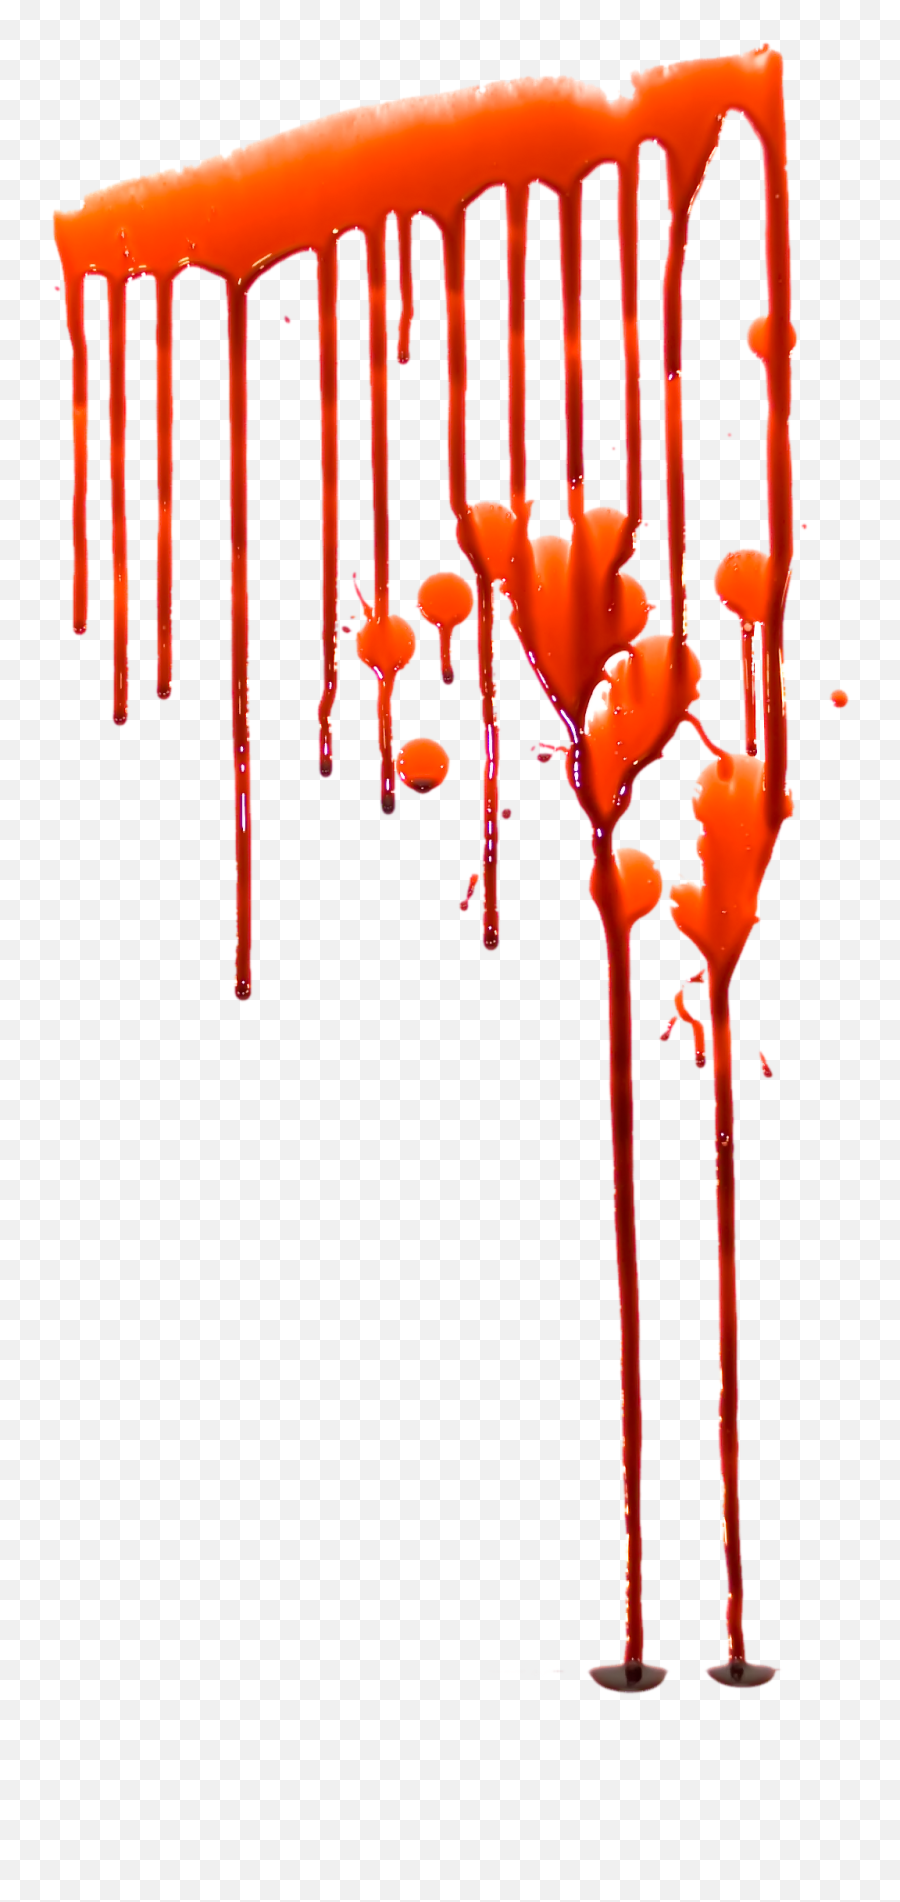 Download Hd Pictures Of Dripping Blood Png Download Emoji,Blood Drips Png